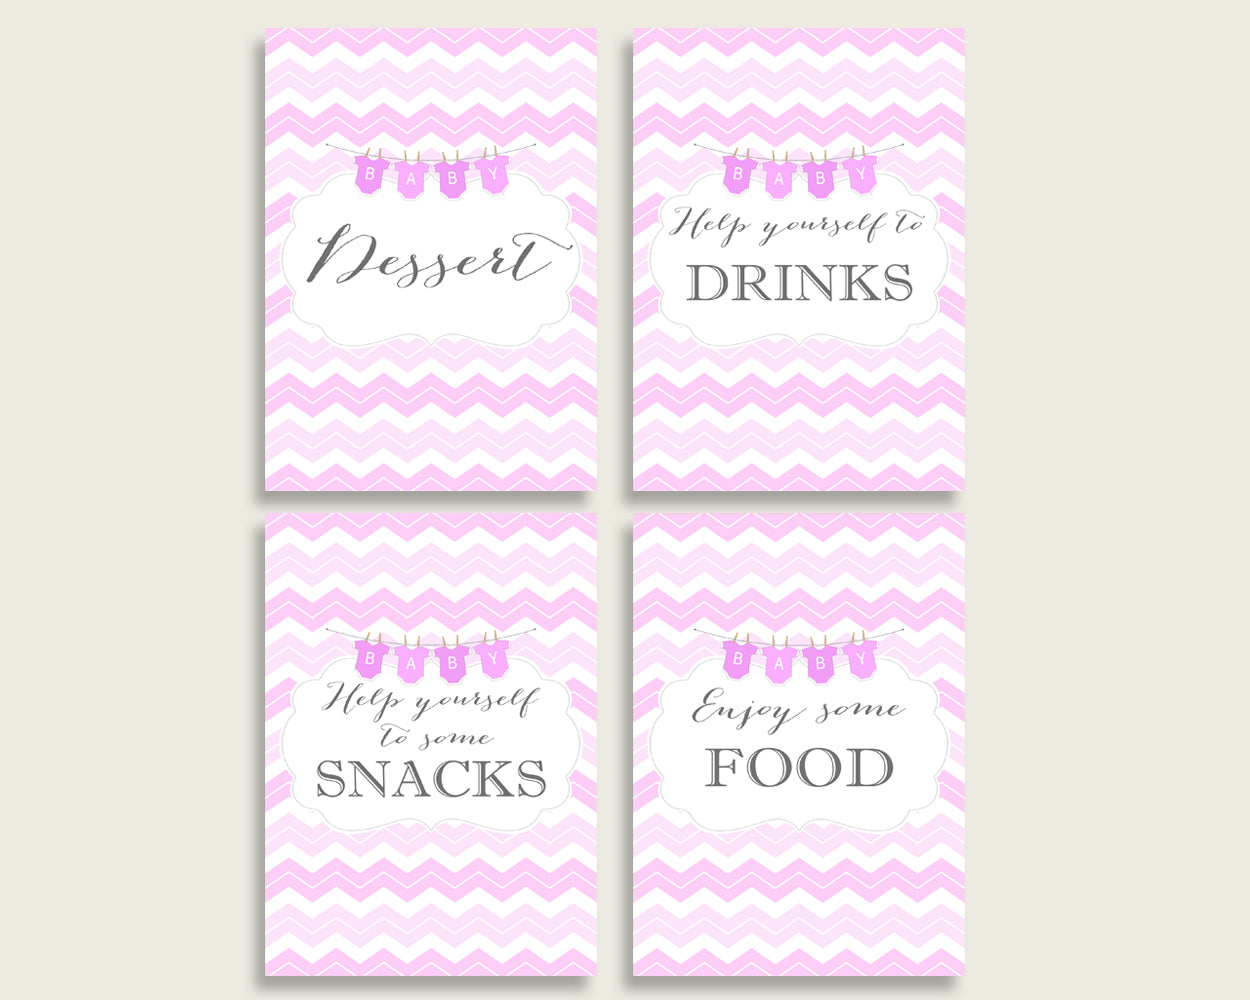 Chevron Baby Shower Girl Table Signs Printable, Pink White Party Table Decor, Favors, Food, Drink, Treat, Guest Book, Instant cp001